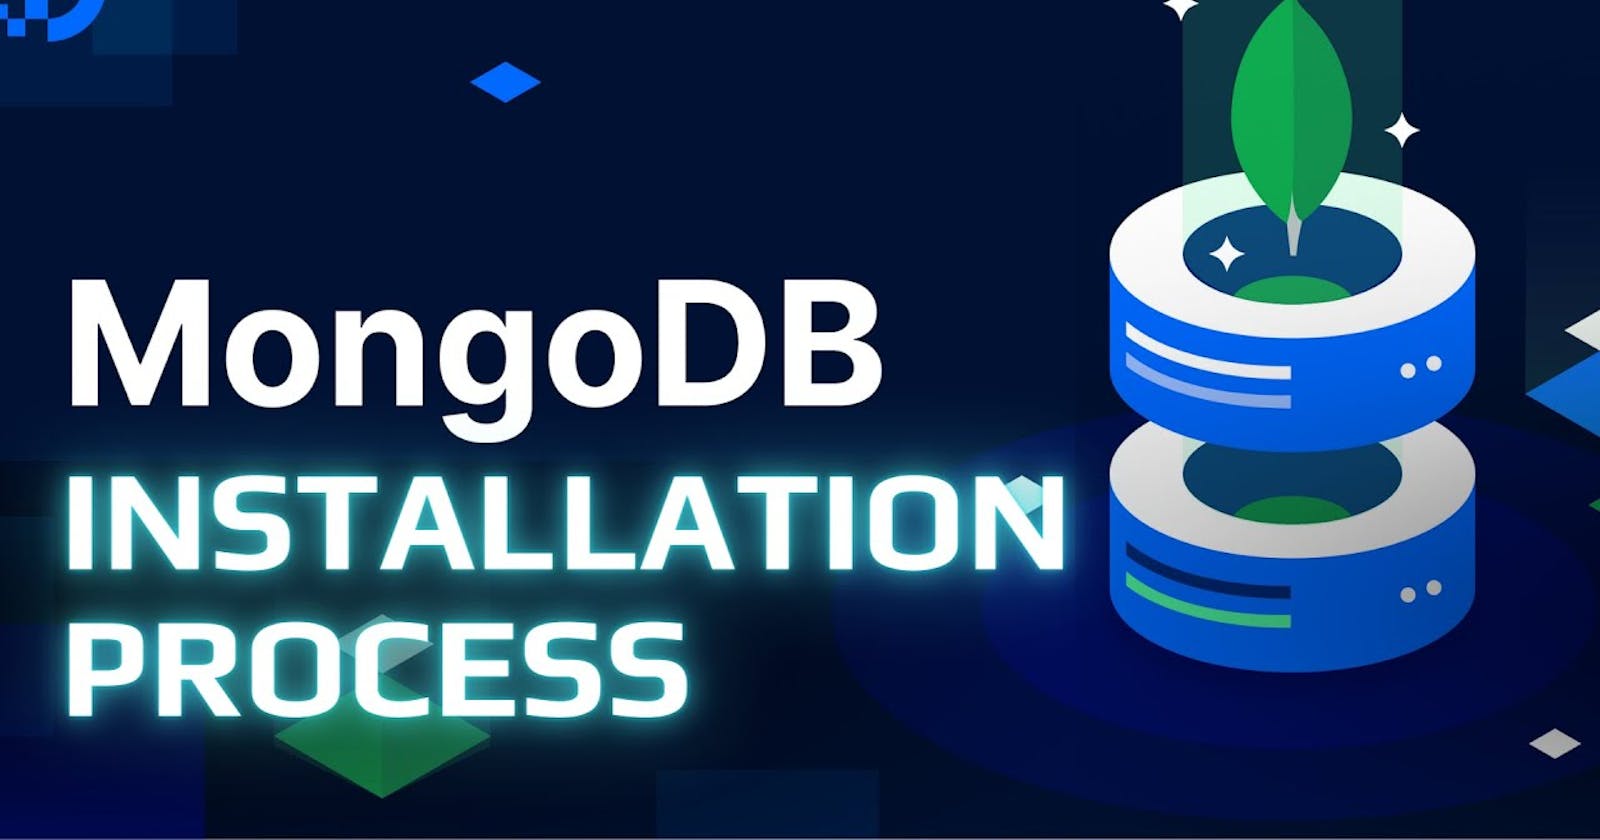 How to Install and Run MongoDB